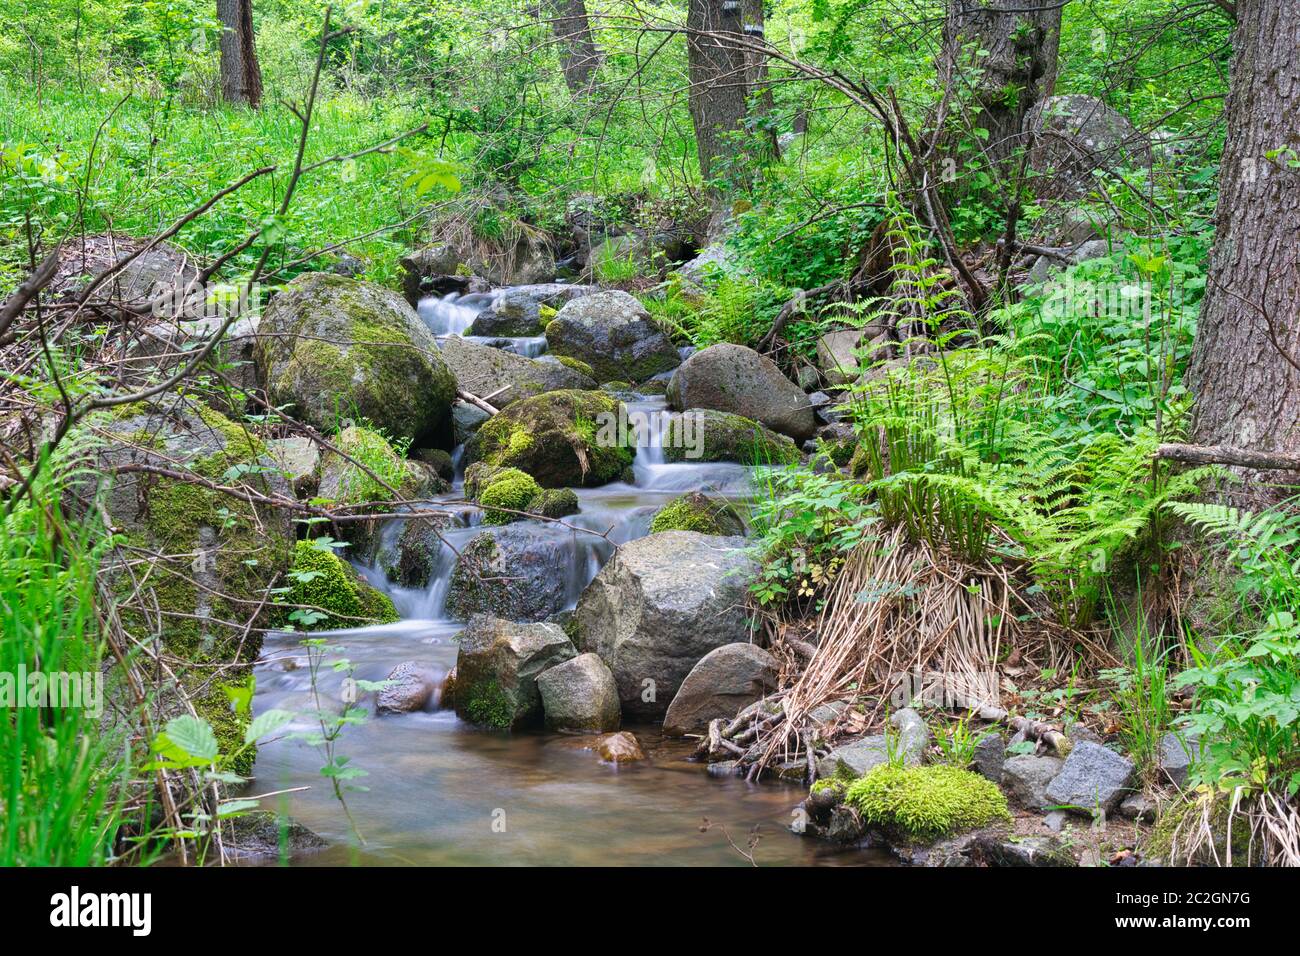 Cascade falls and mossy rocks, image of river in the spring forest Stock Photo